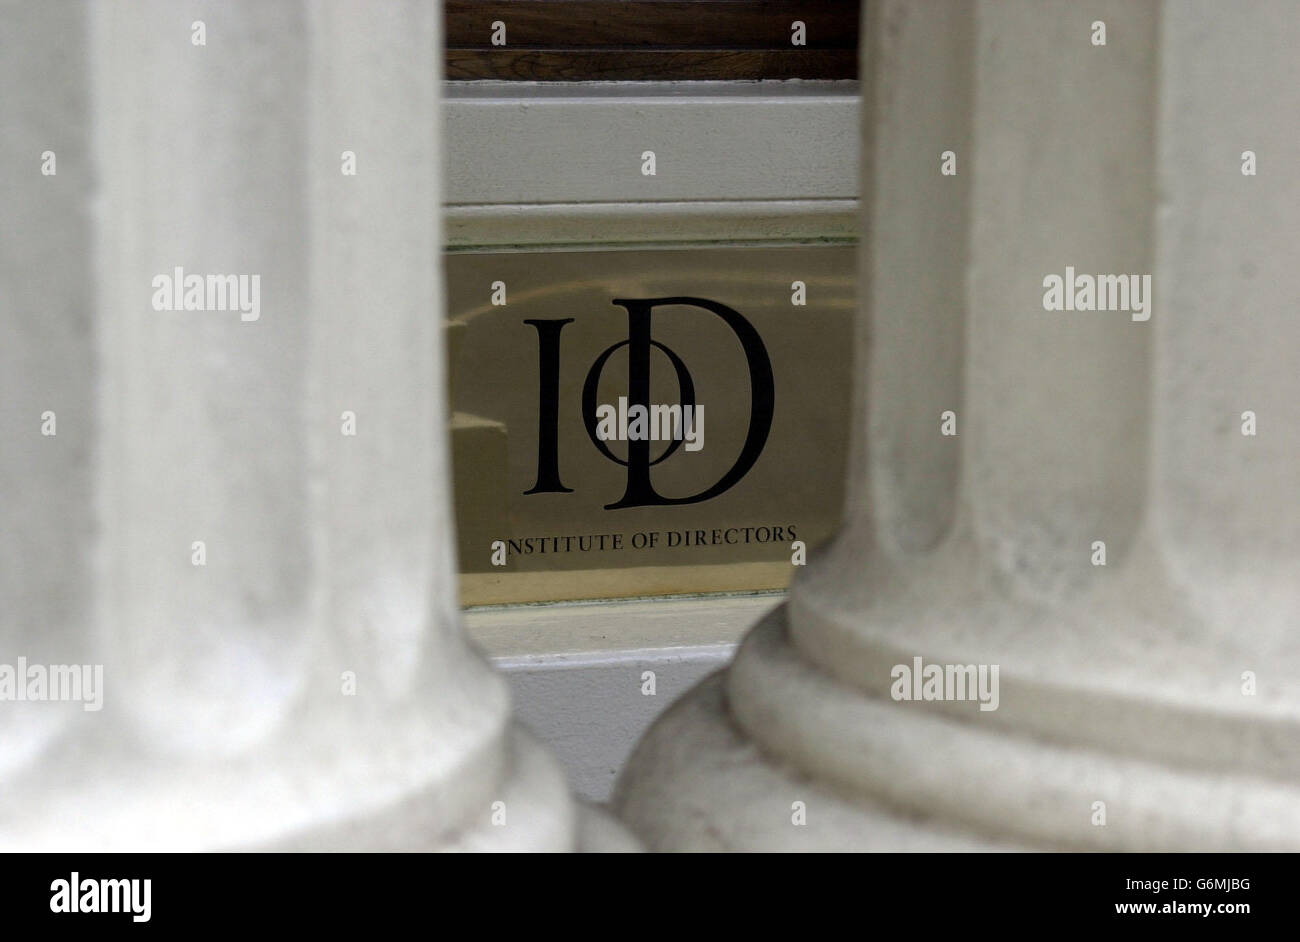 Institute of Directors. A picture of the plaque for the Institute of Directors (IOD) on Pall Mall, London. Stock Photo